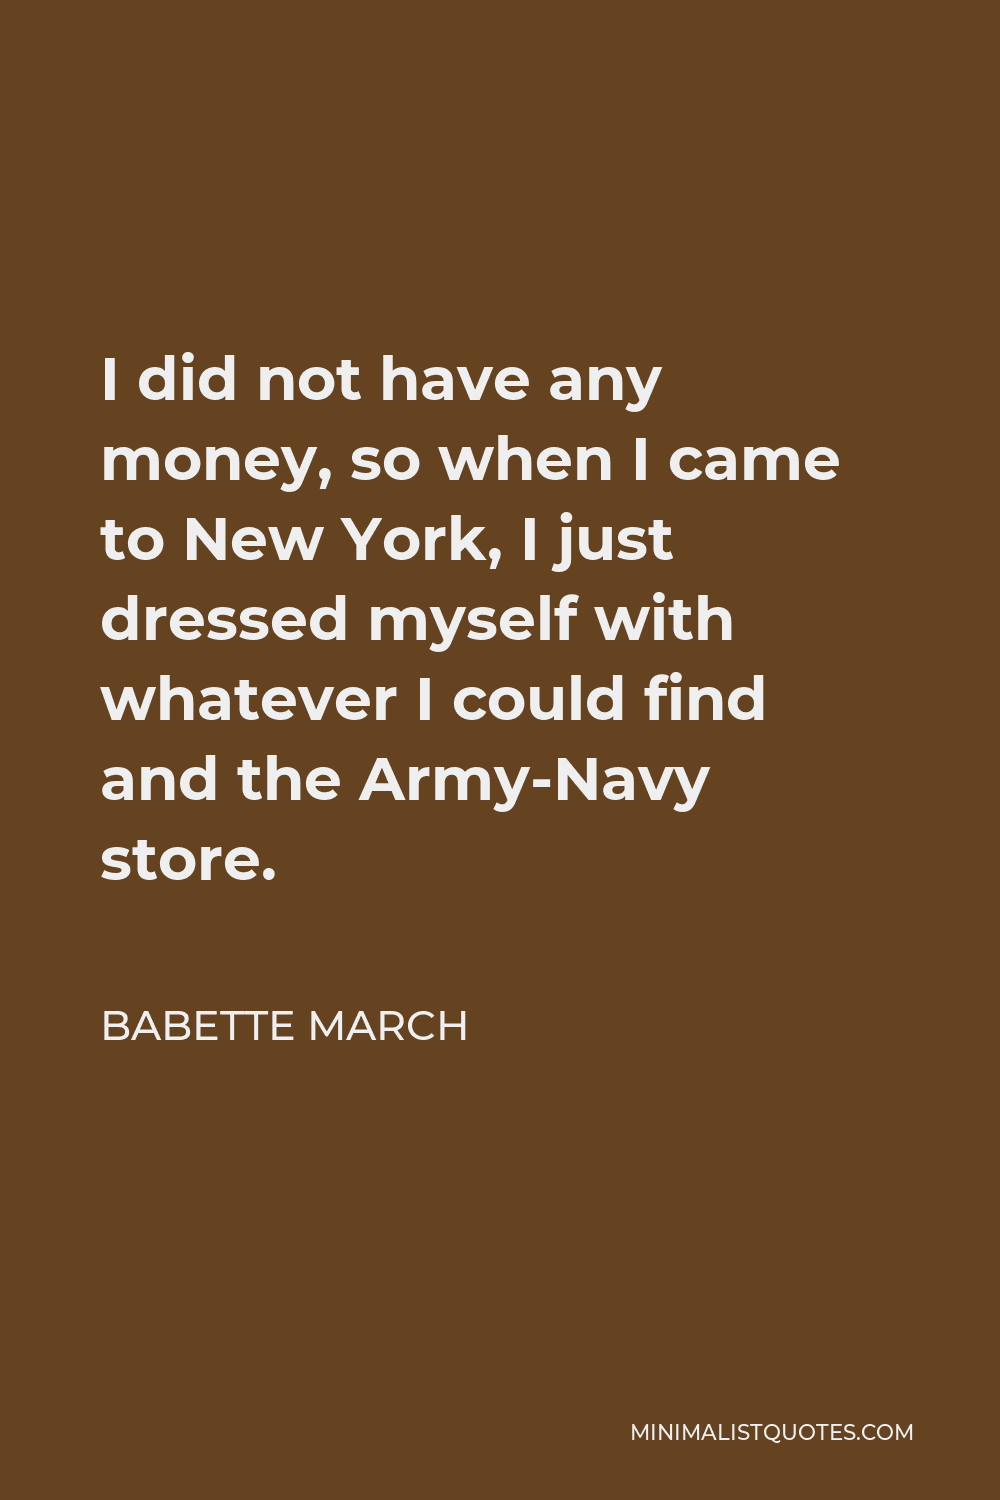 Babette March Quote - I did not have any money, so when I came to New York, I just dressed myself with whatever I could find and the Army-Navy store.